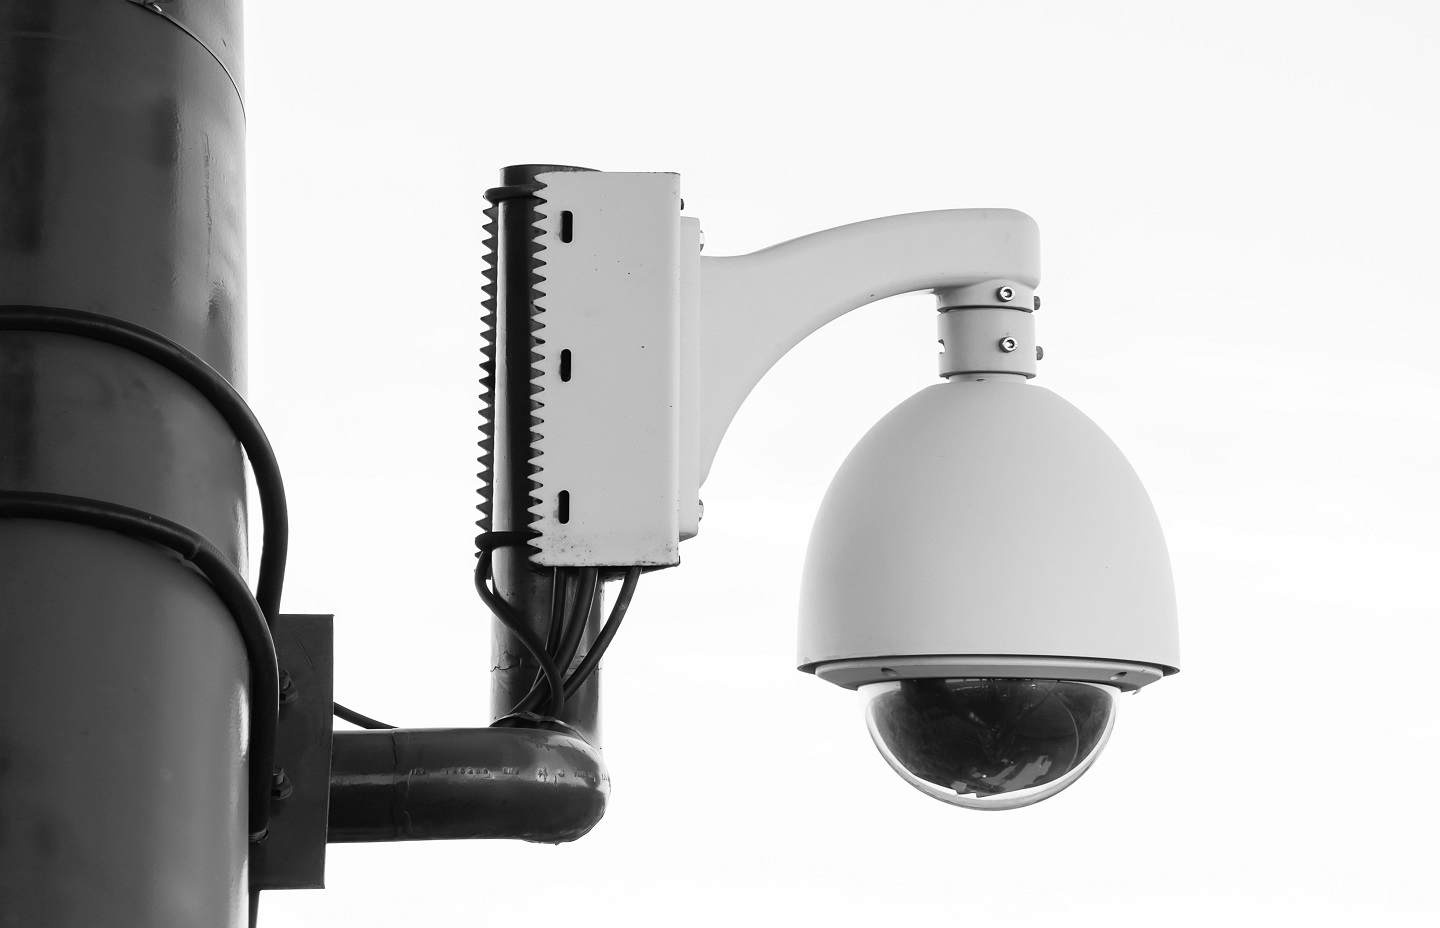 CCTV monitoring is one of the most sought facilities in the apartments now a days